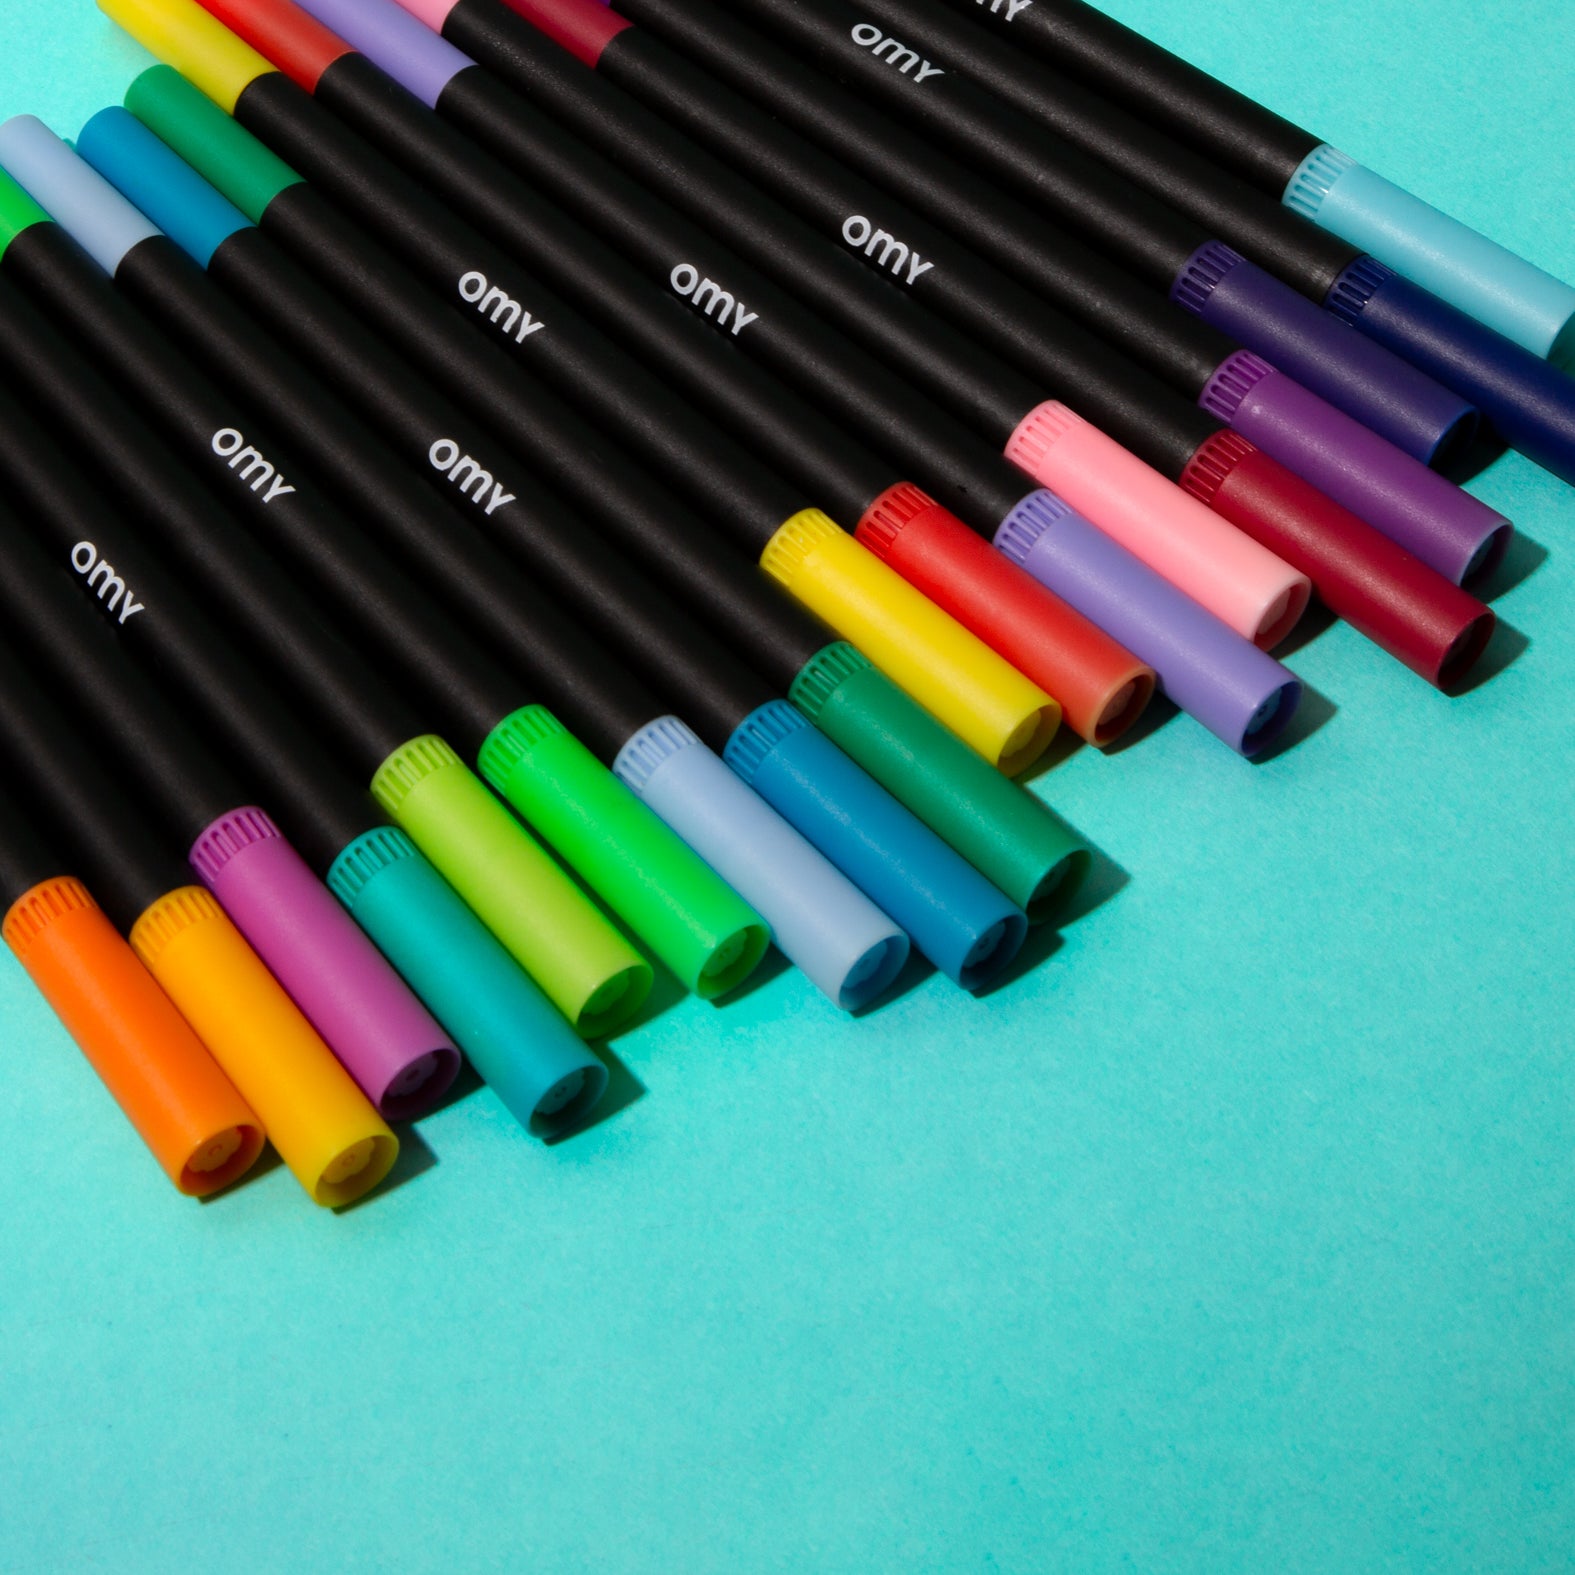 Box of 100 markers